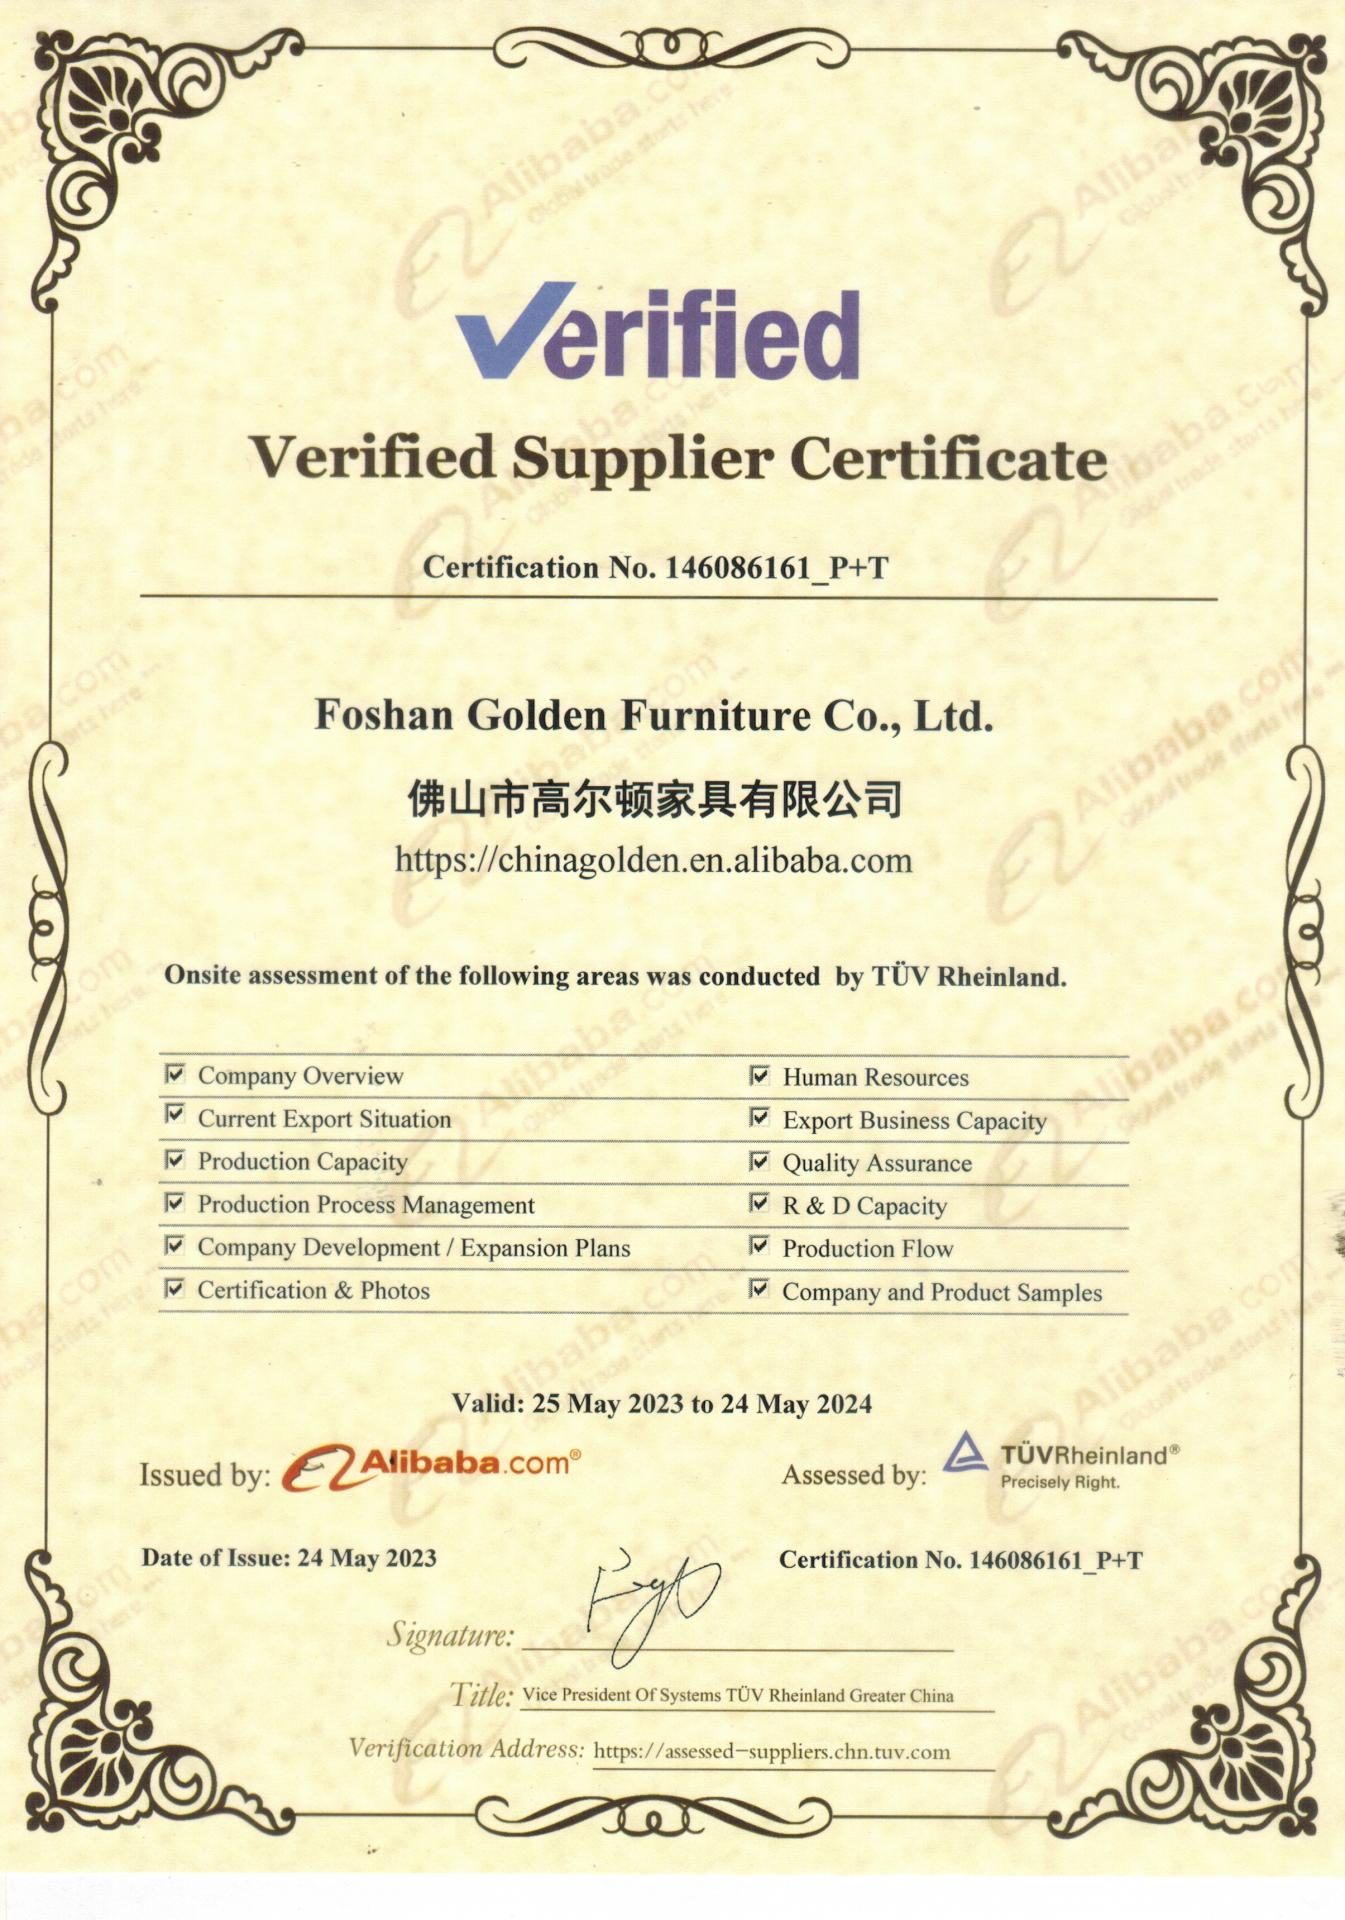 2023-5 Our company get the Verified Supplier Certificate of Alibaba